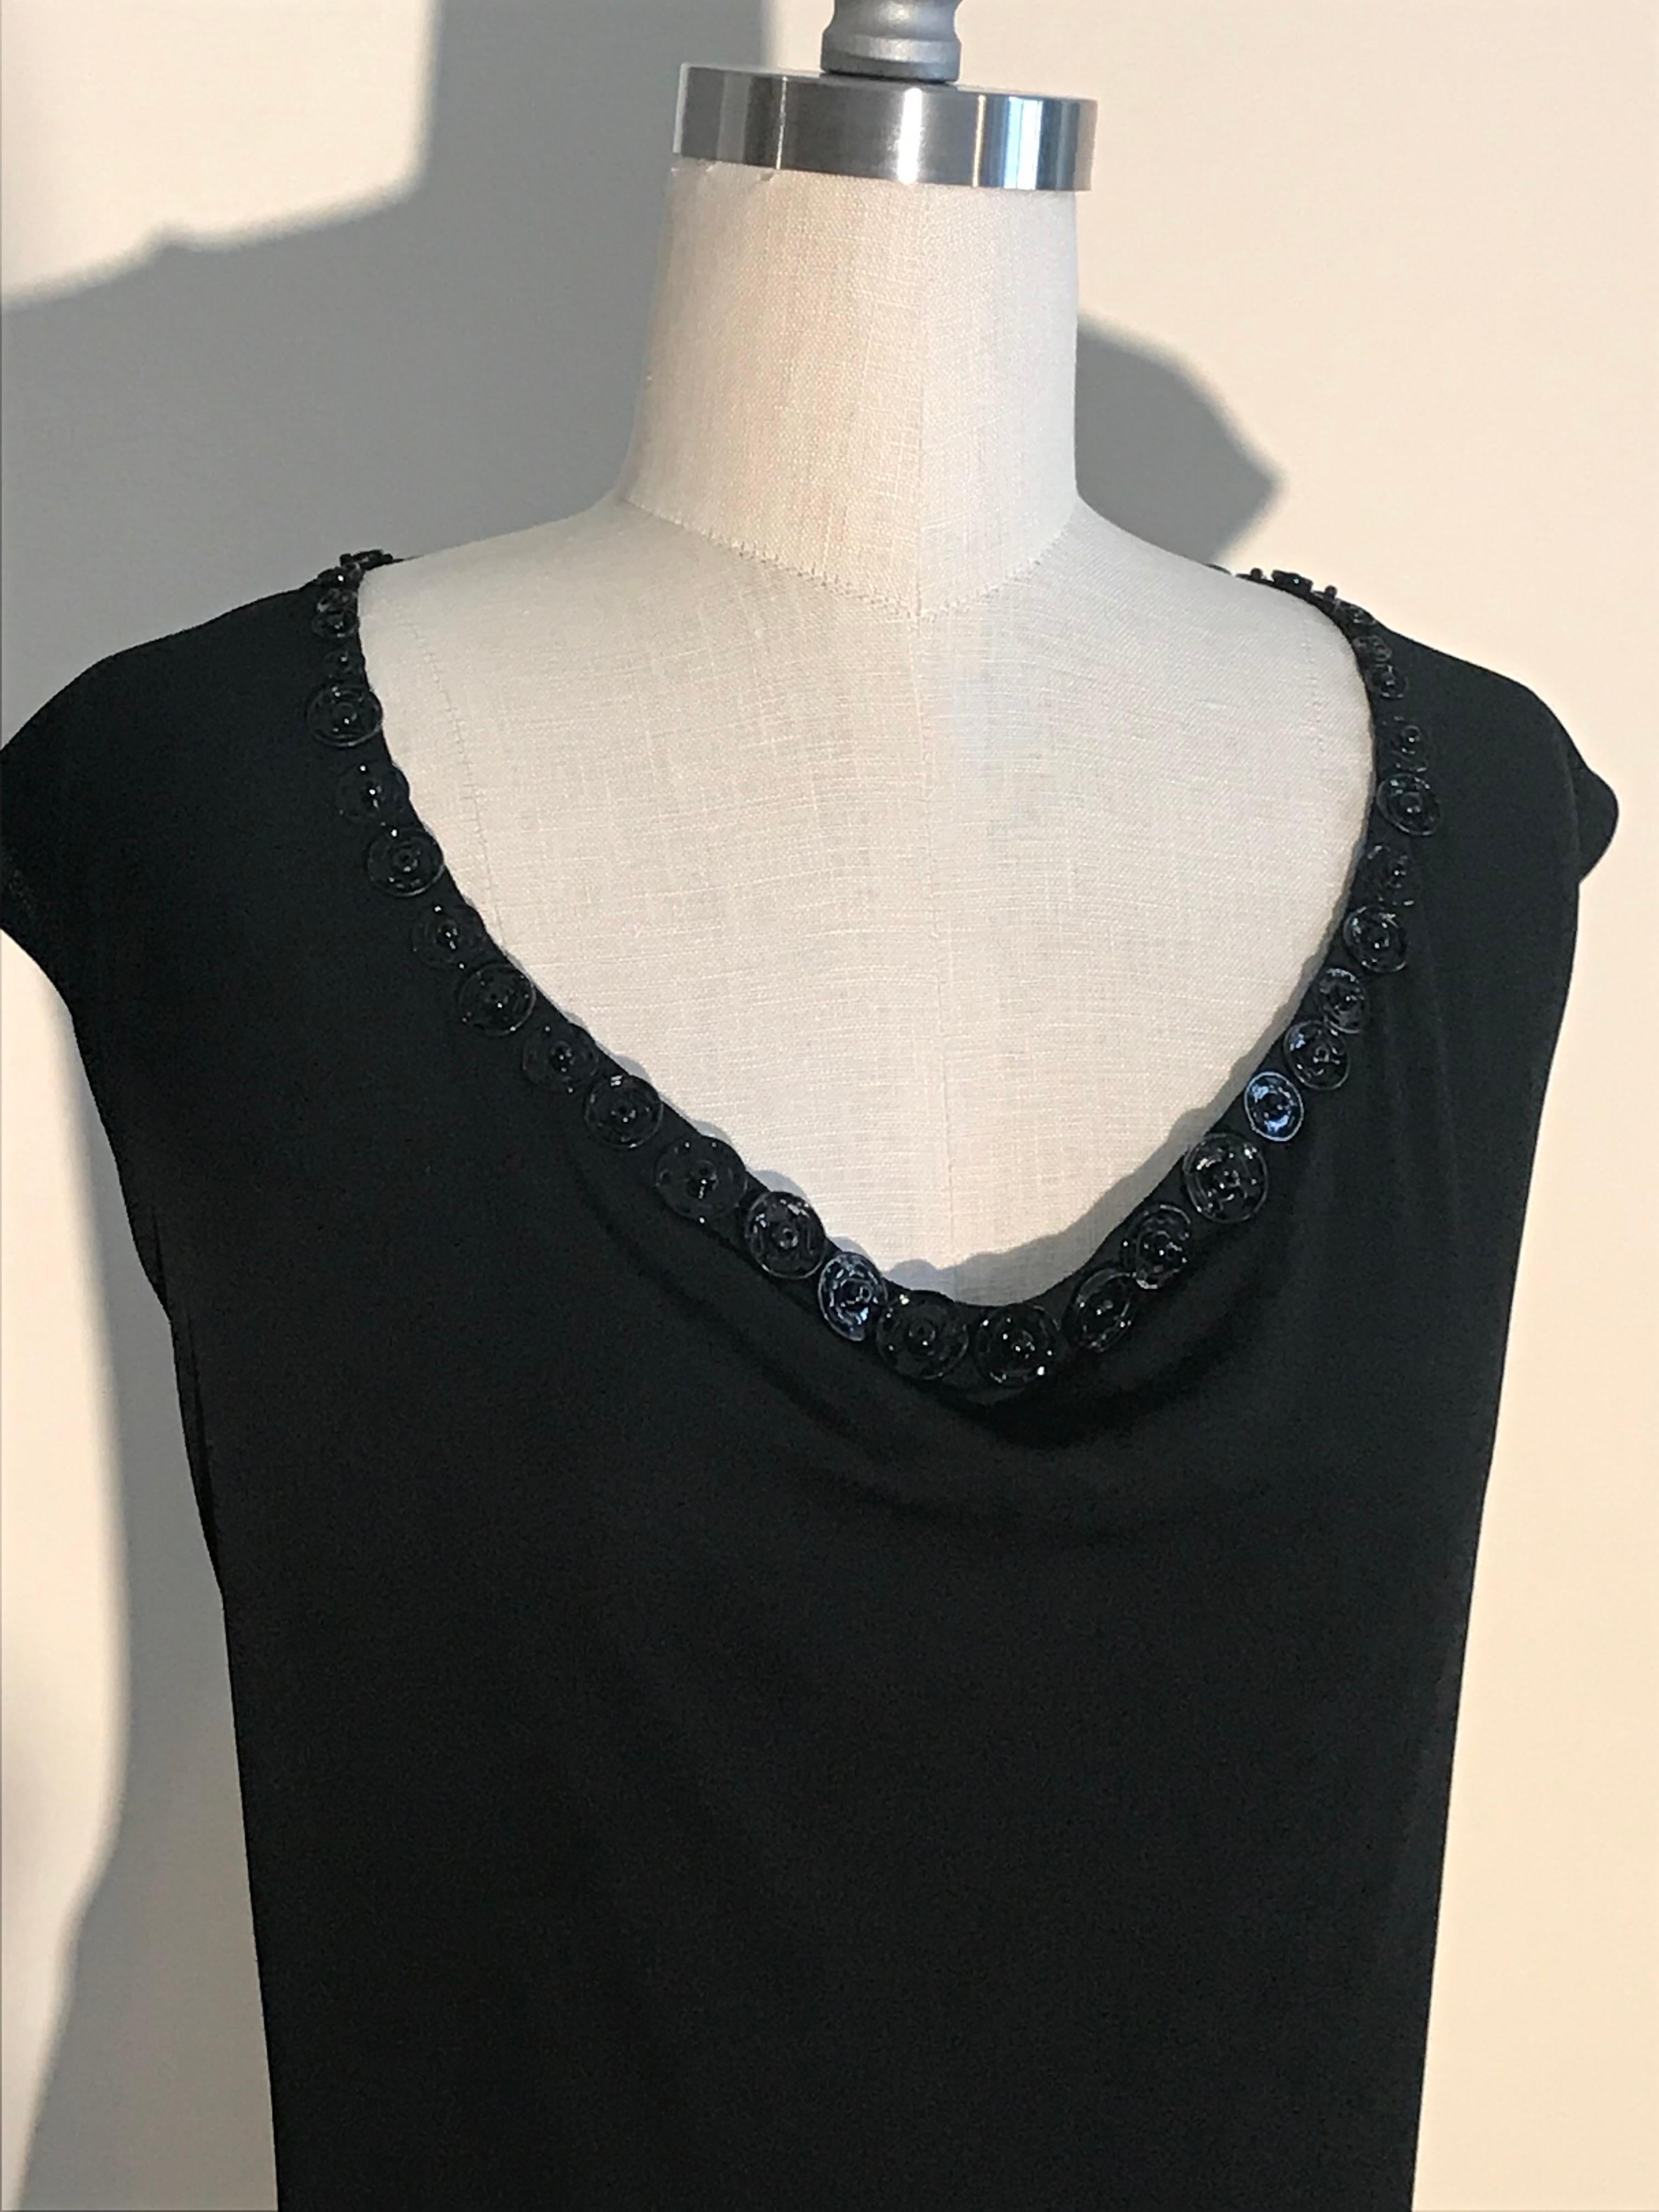 Jean Paul Gaultier Femme 2000s little black jersey sleeveless dress with various sized black metal snap embellishments around neck. Pulls on overhead.

100% rayon.
Fully lined in 92% polyamide, 8% elastane.

Made in Italy.

Labelled size IT 42, US